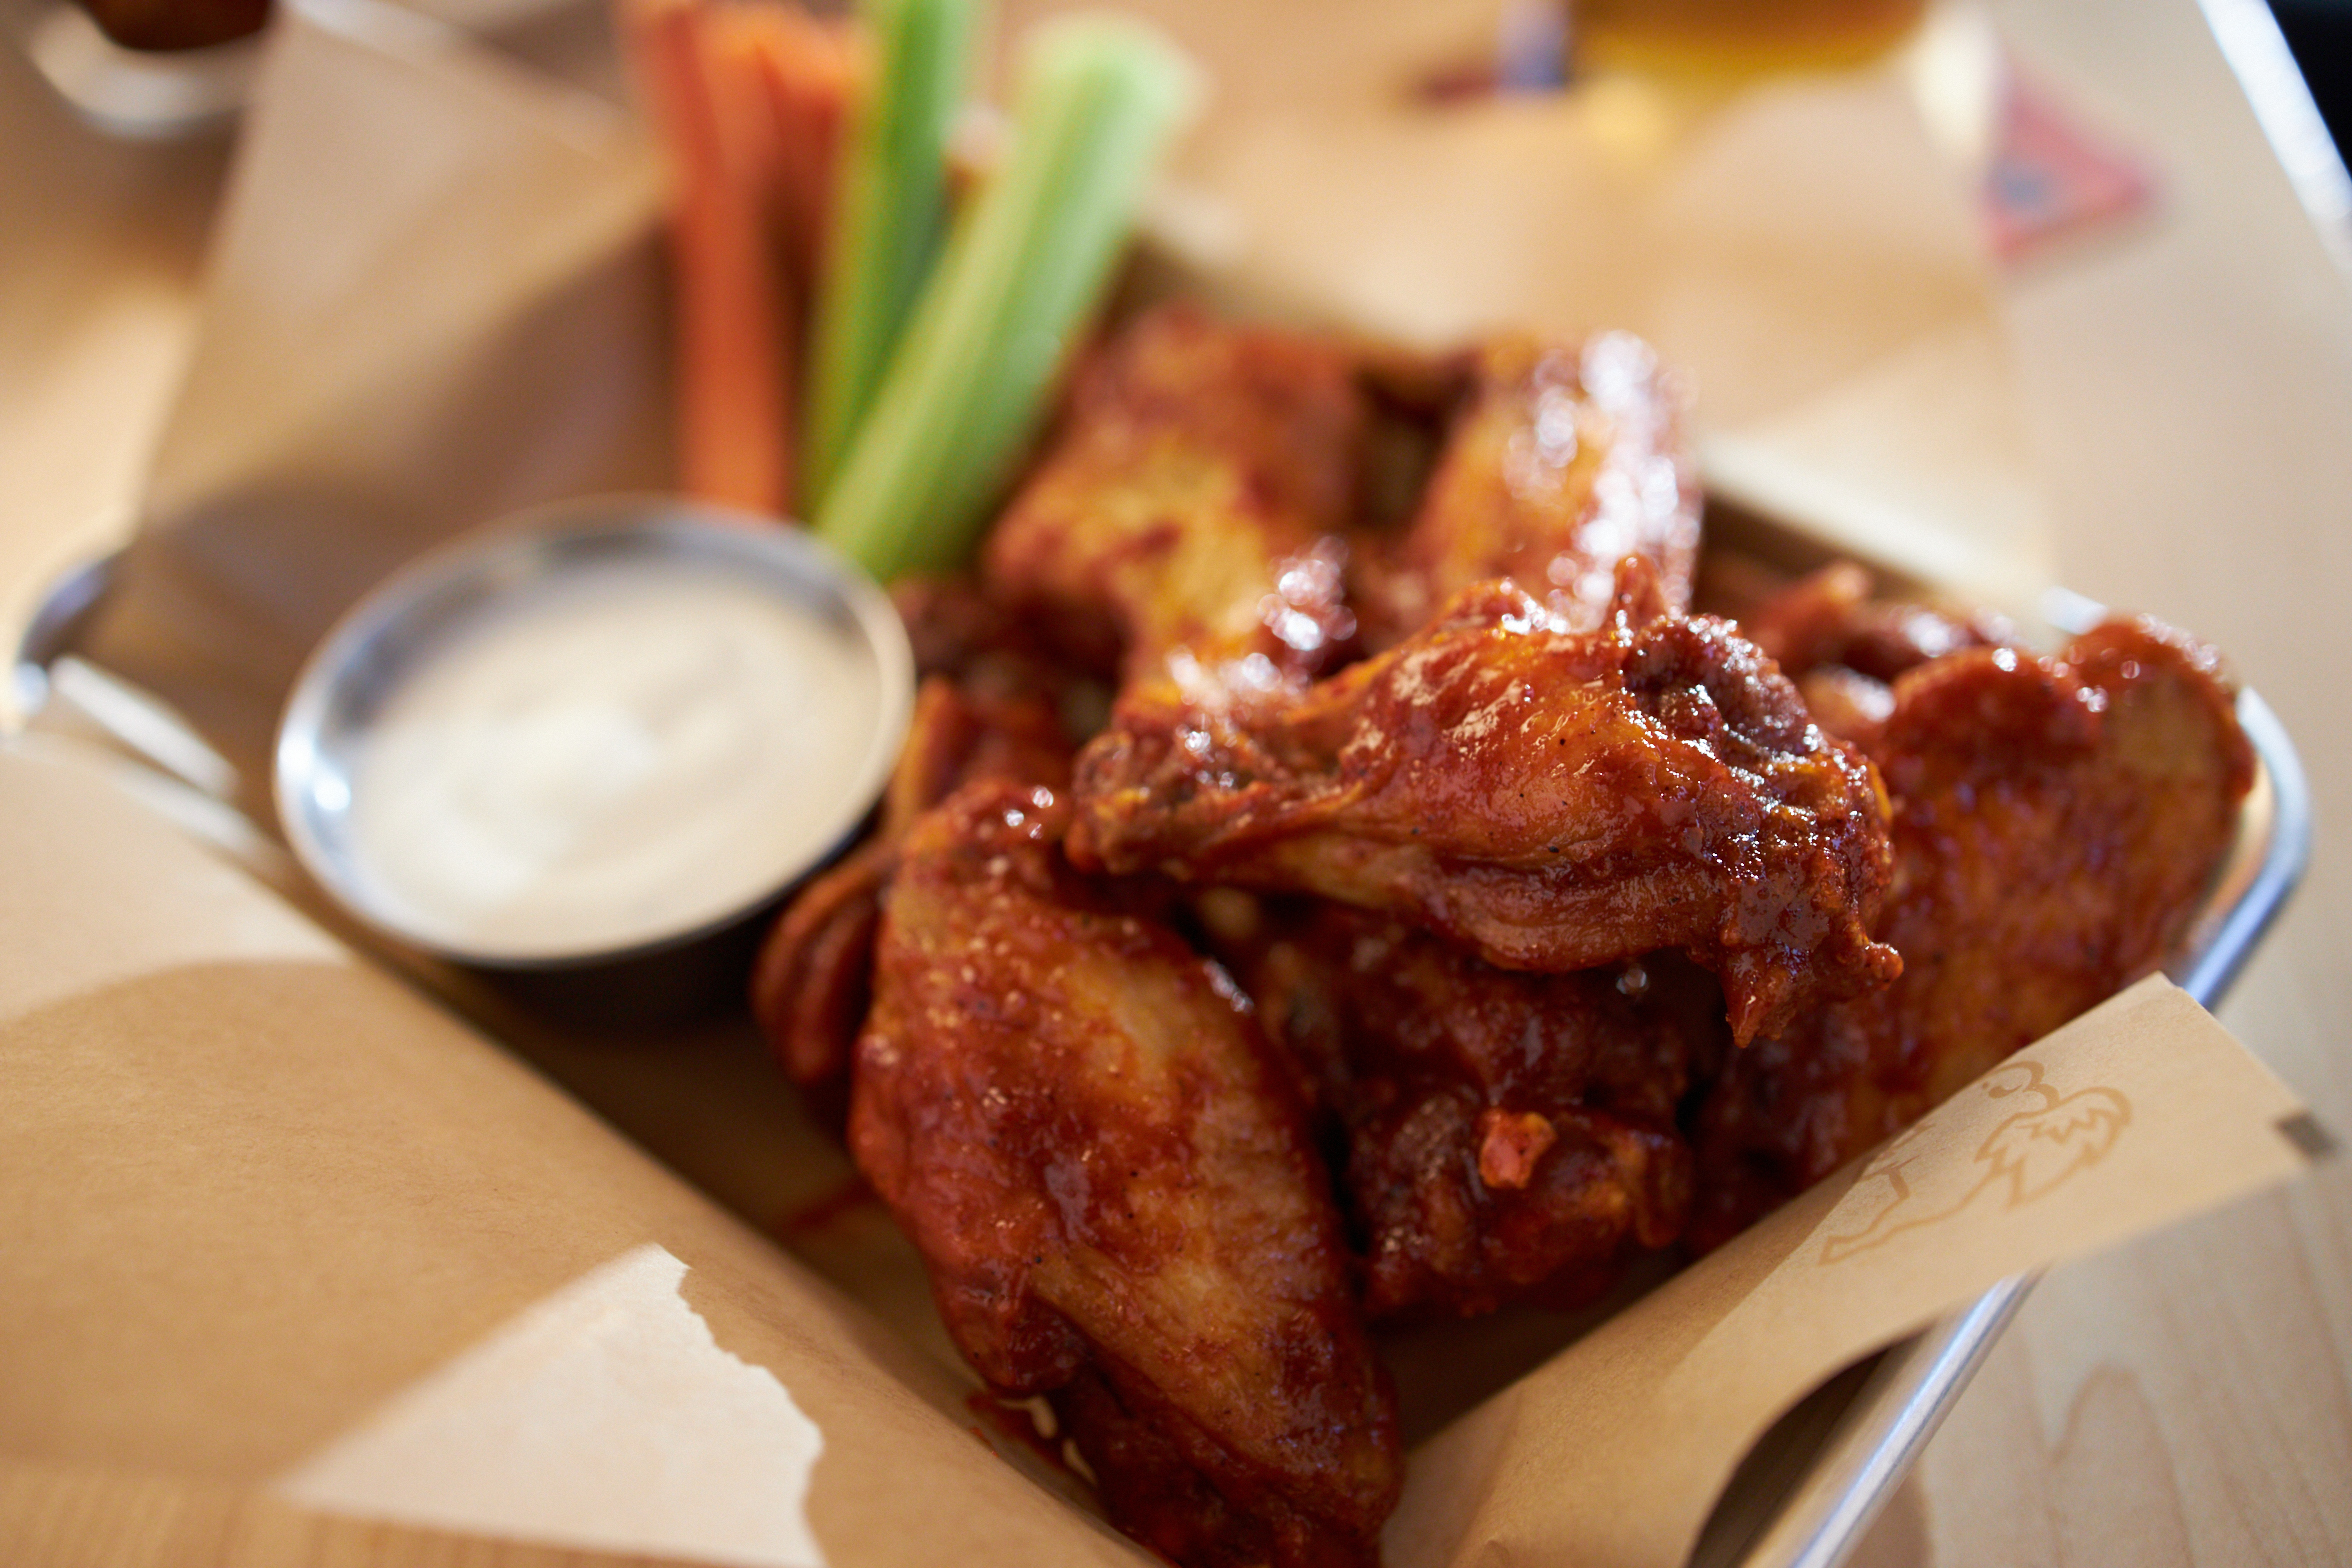 More Please: Buffalo Wings Wagers Wings for America “Big Game” Goes to Overtime | Business Wire